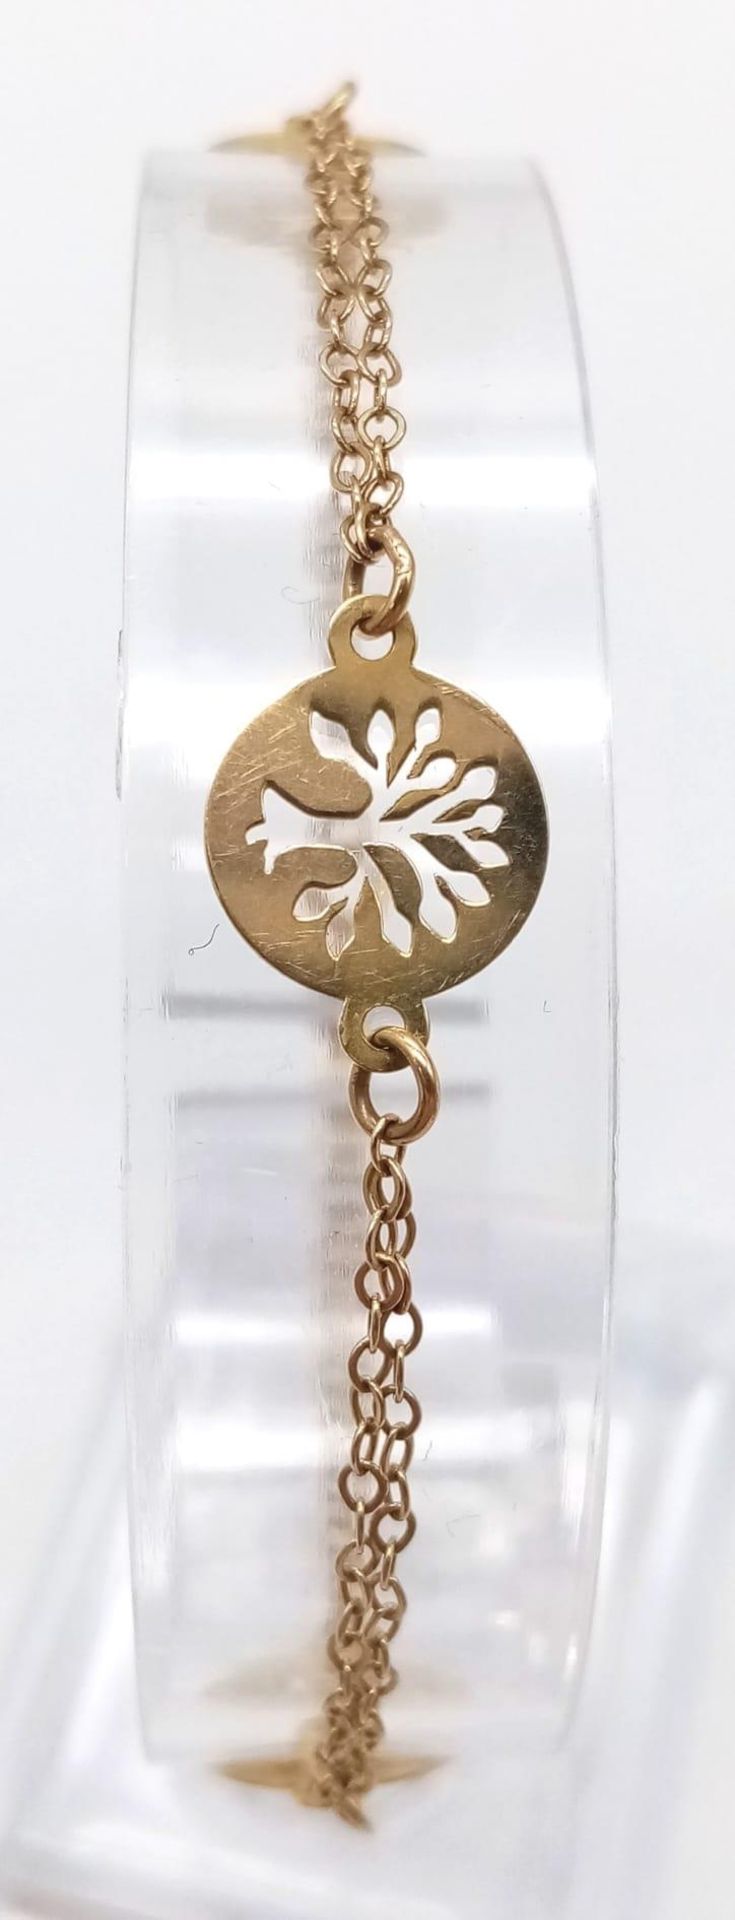 An 18K Yellow Gold Tree of Life Bracelet. 16cm. 2.2g weight. - Image 3 of 4